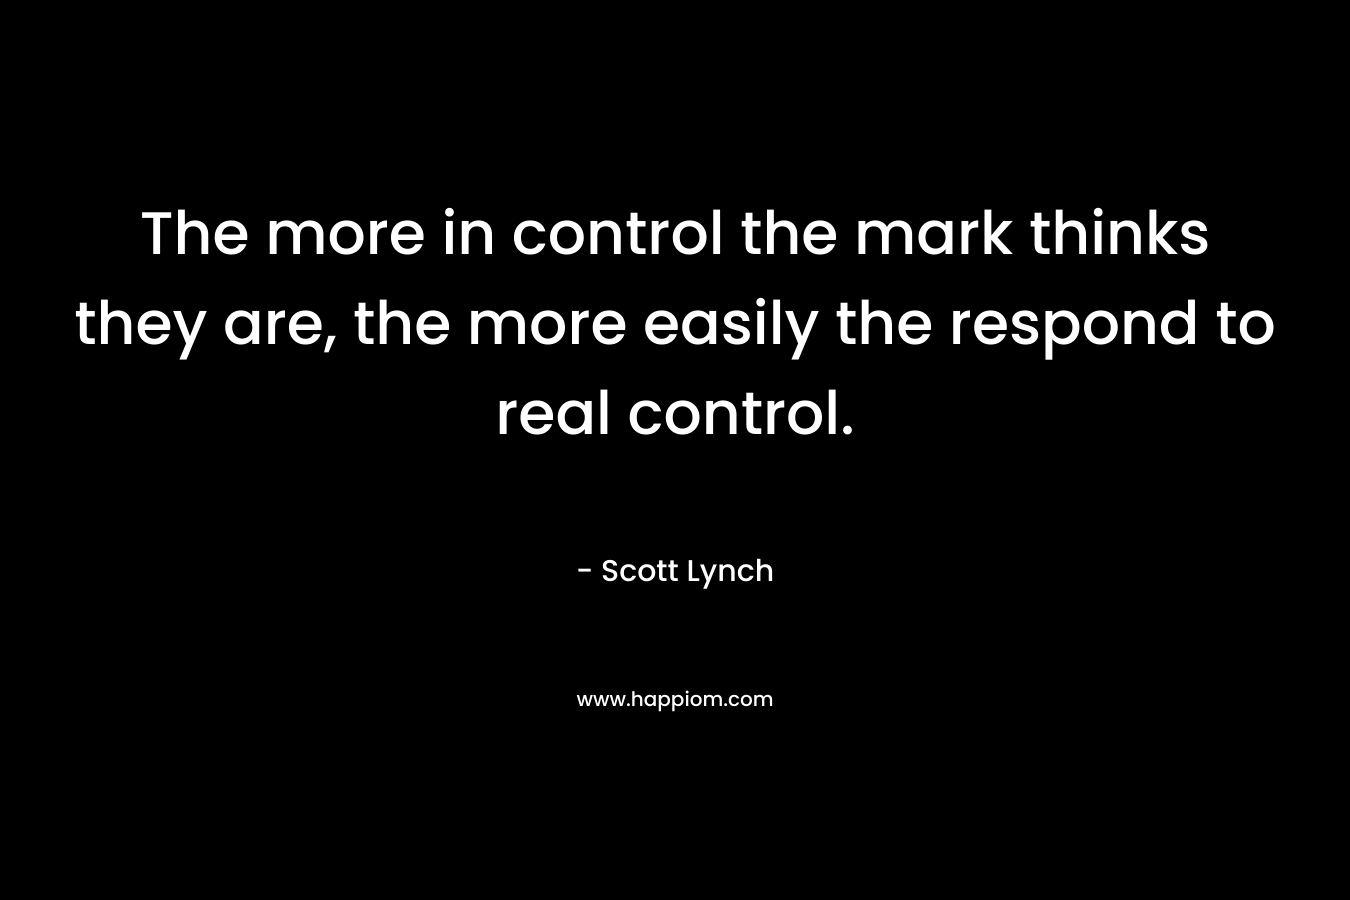 The more in control the mark thinks they are, the more easily the respond to real control.